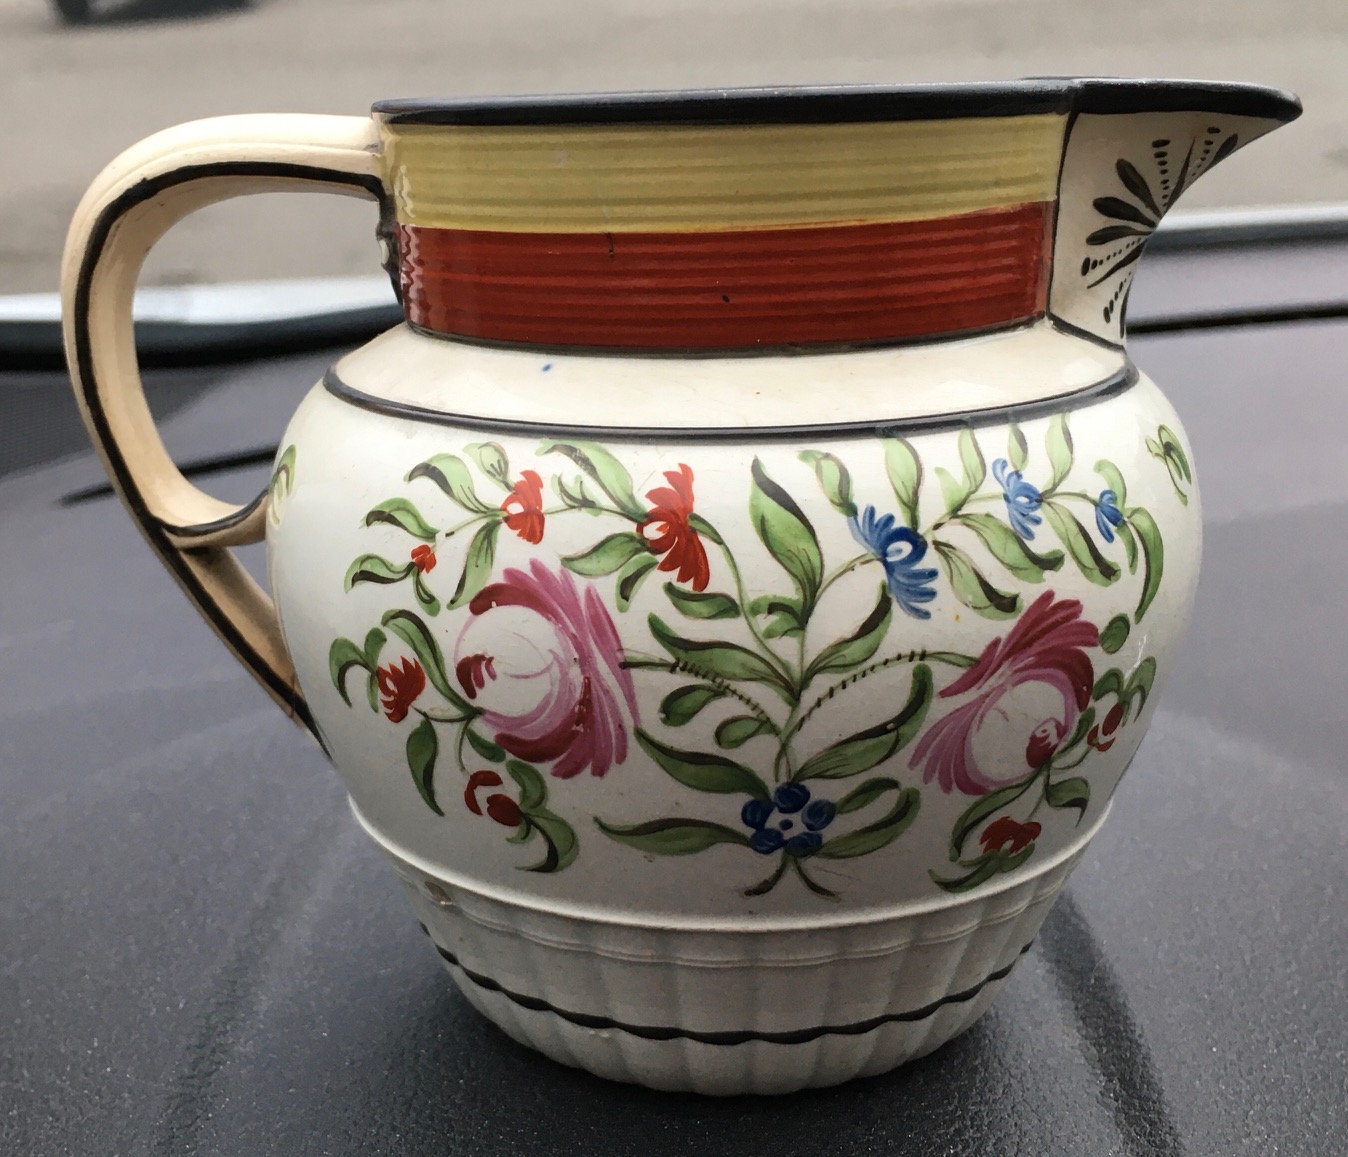 Info on my little painted floral ?Staffordshire? jug/pitcher, please ...